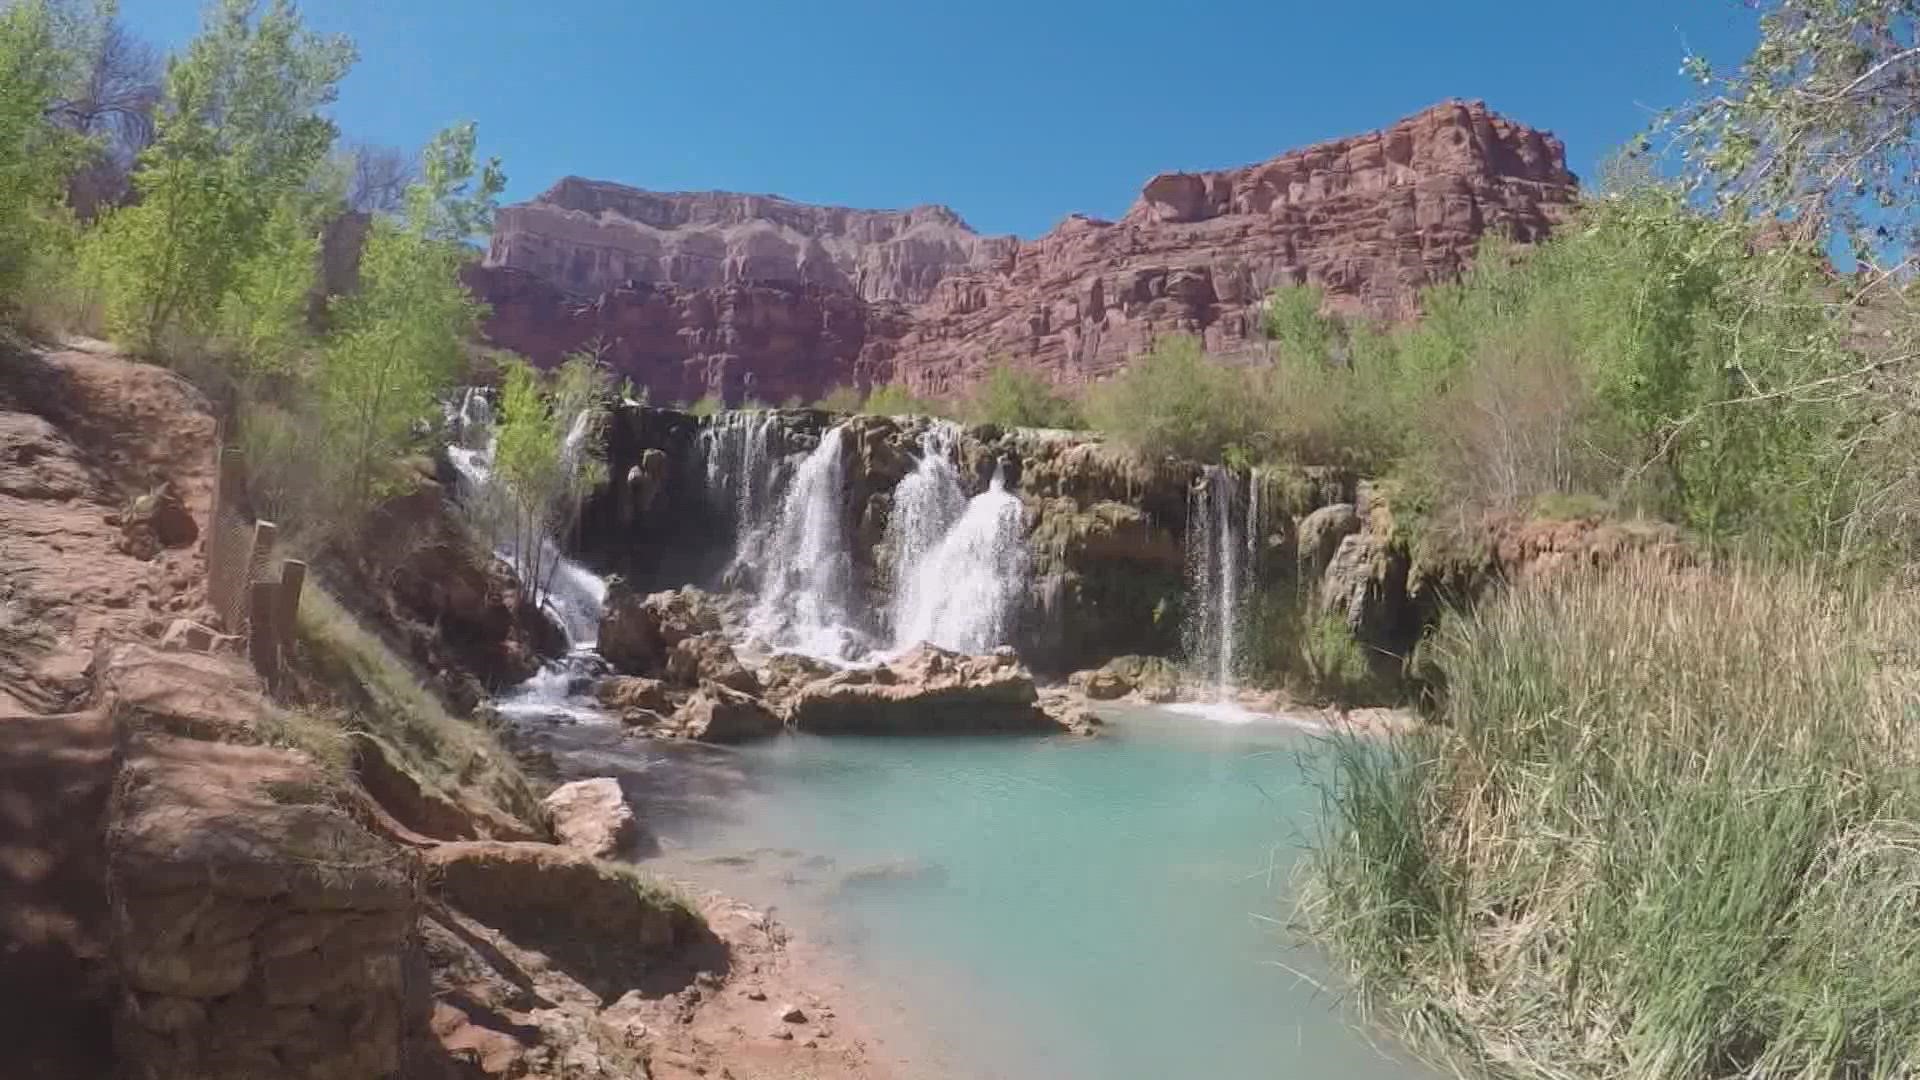 Leaders of the Havasupai tribe closed the reservation in March of 2020. At this time, the tribe will not be accepting any new reservations this year.